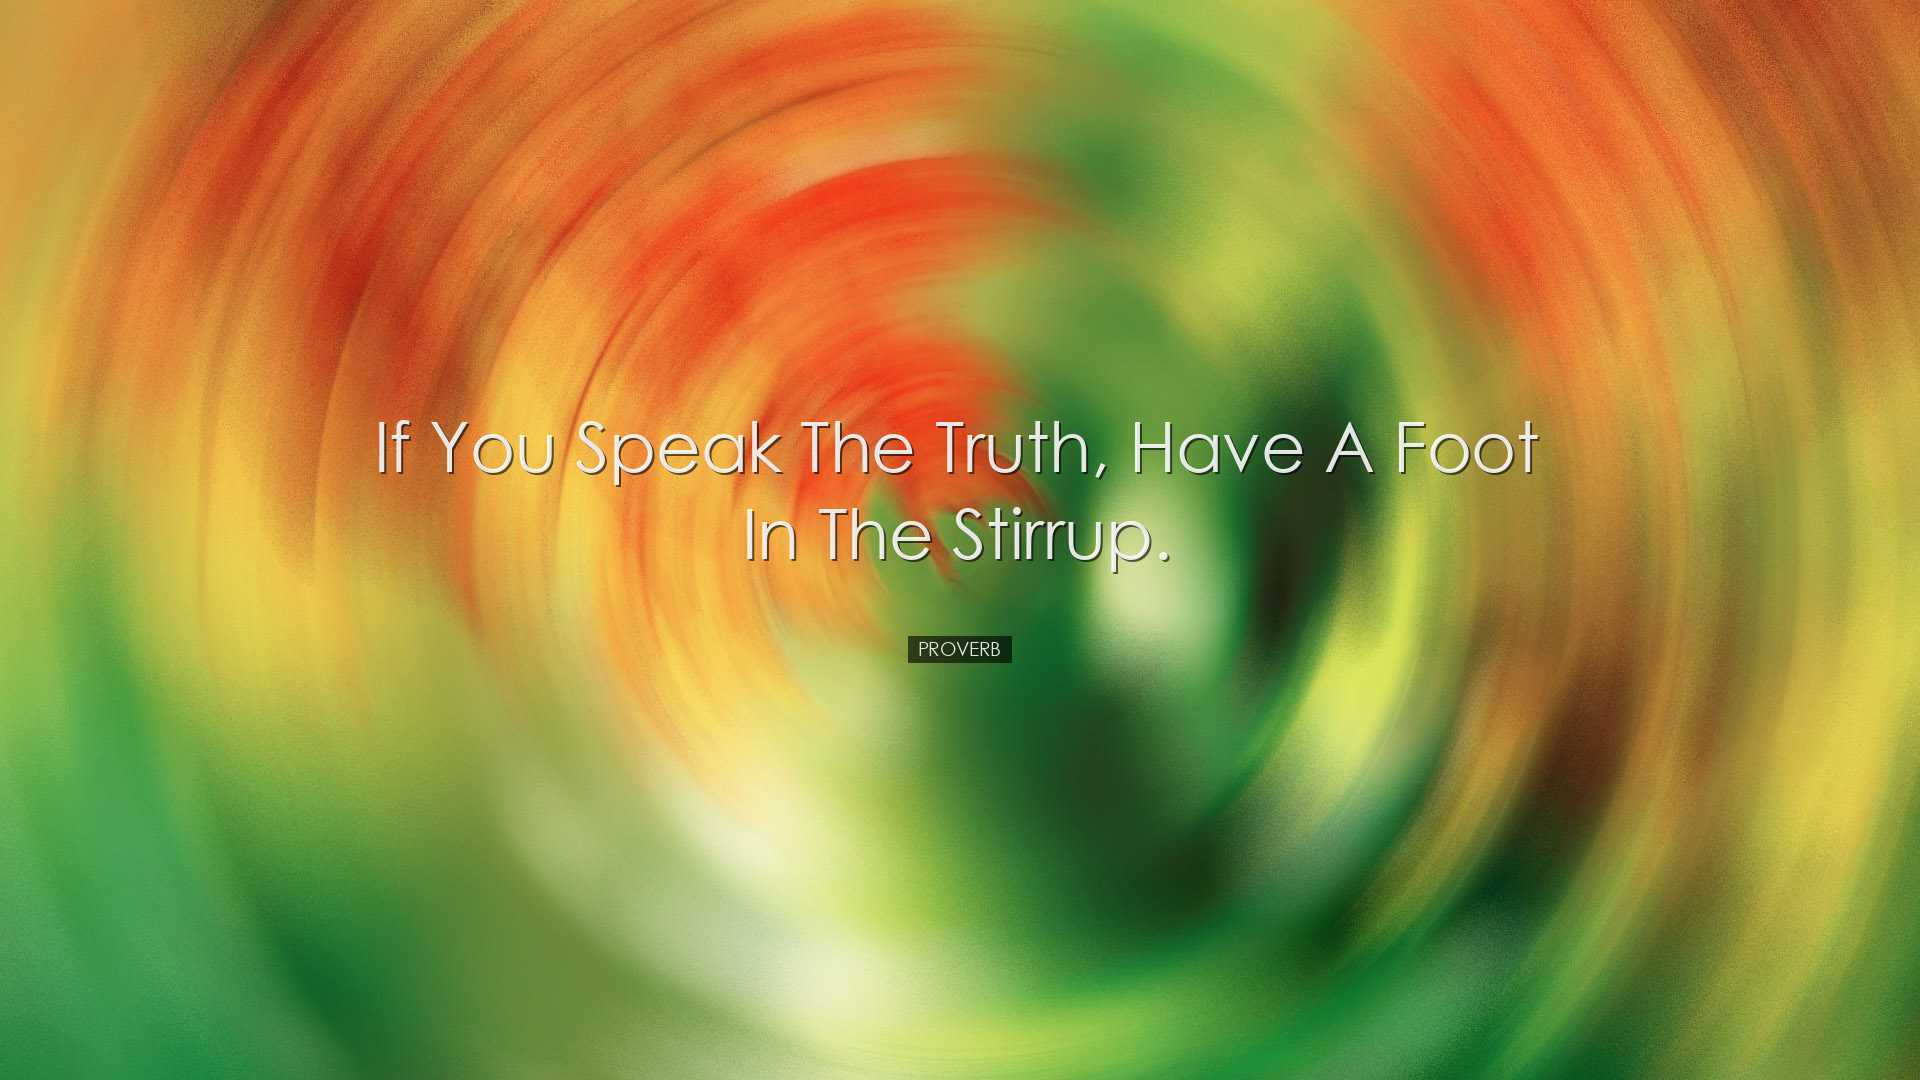 If you speak the truth, have a foot in the stirrup. - Proverb